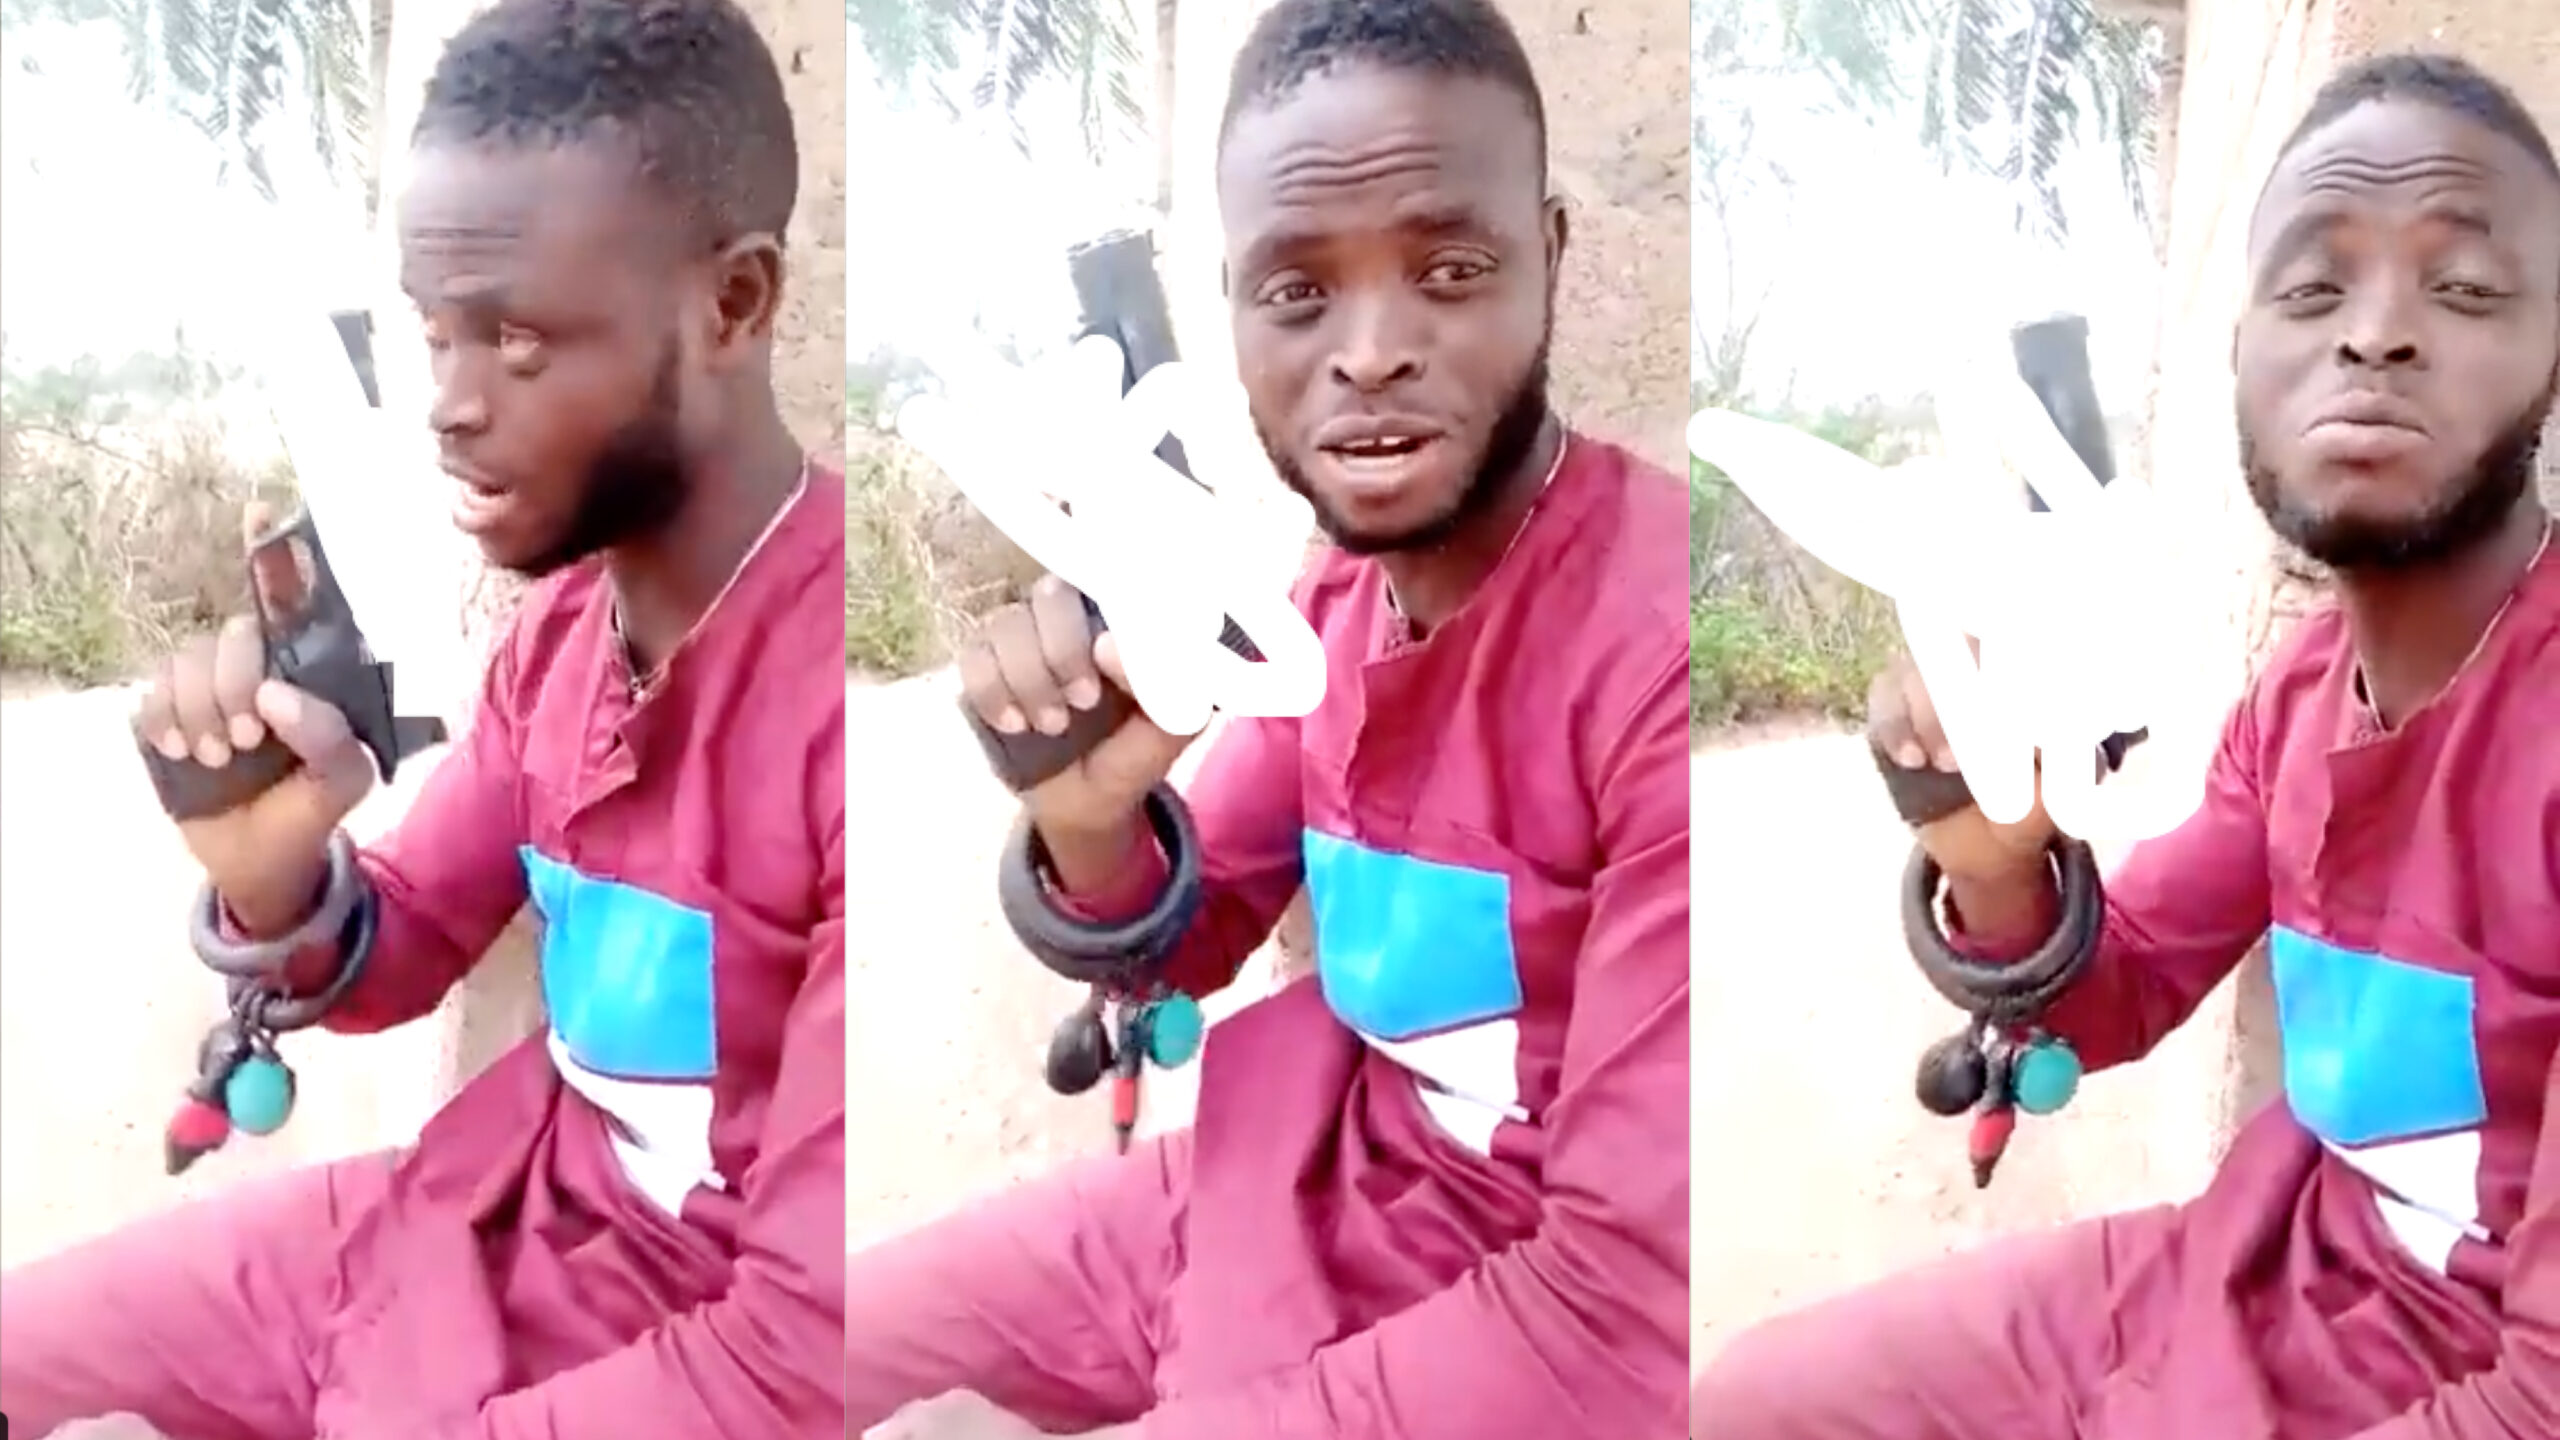 Adeiso: Suspected robber arrested after seen brandishing gun and issuing threats in viral video